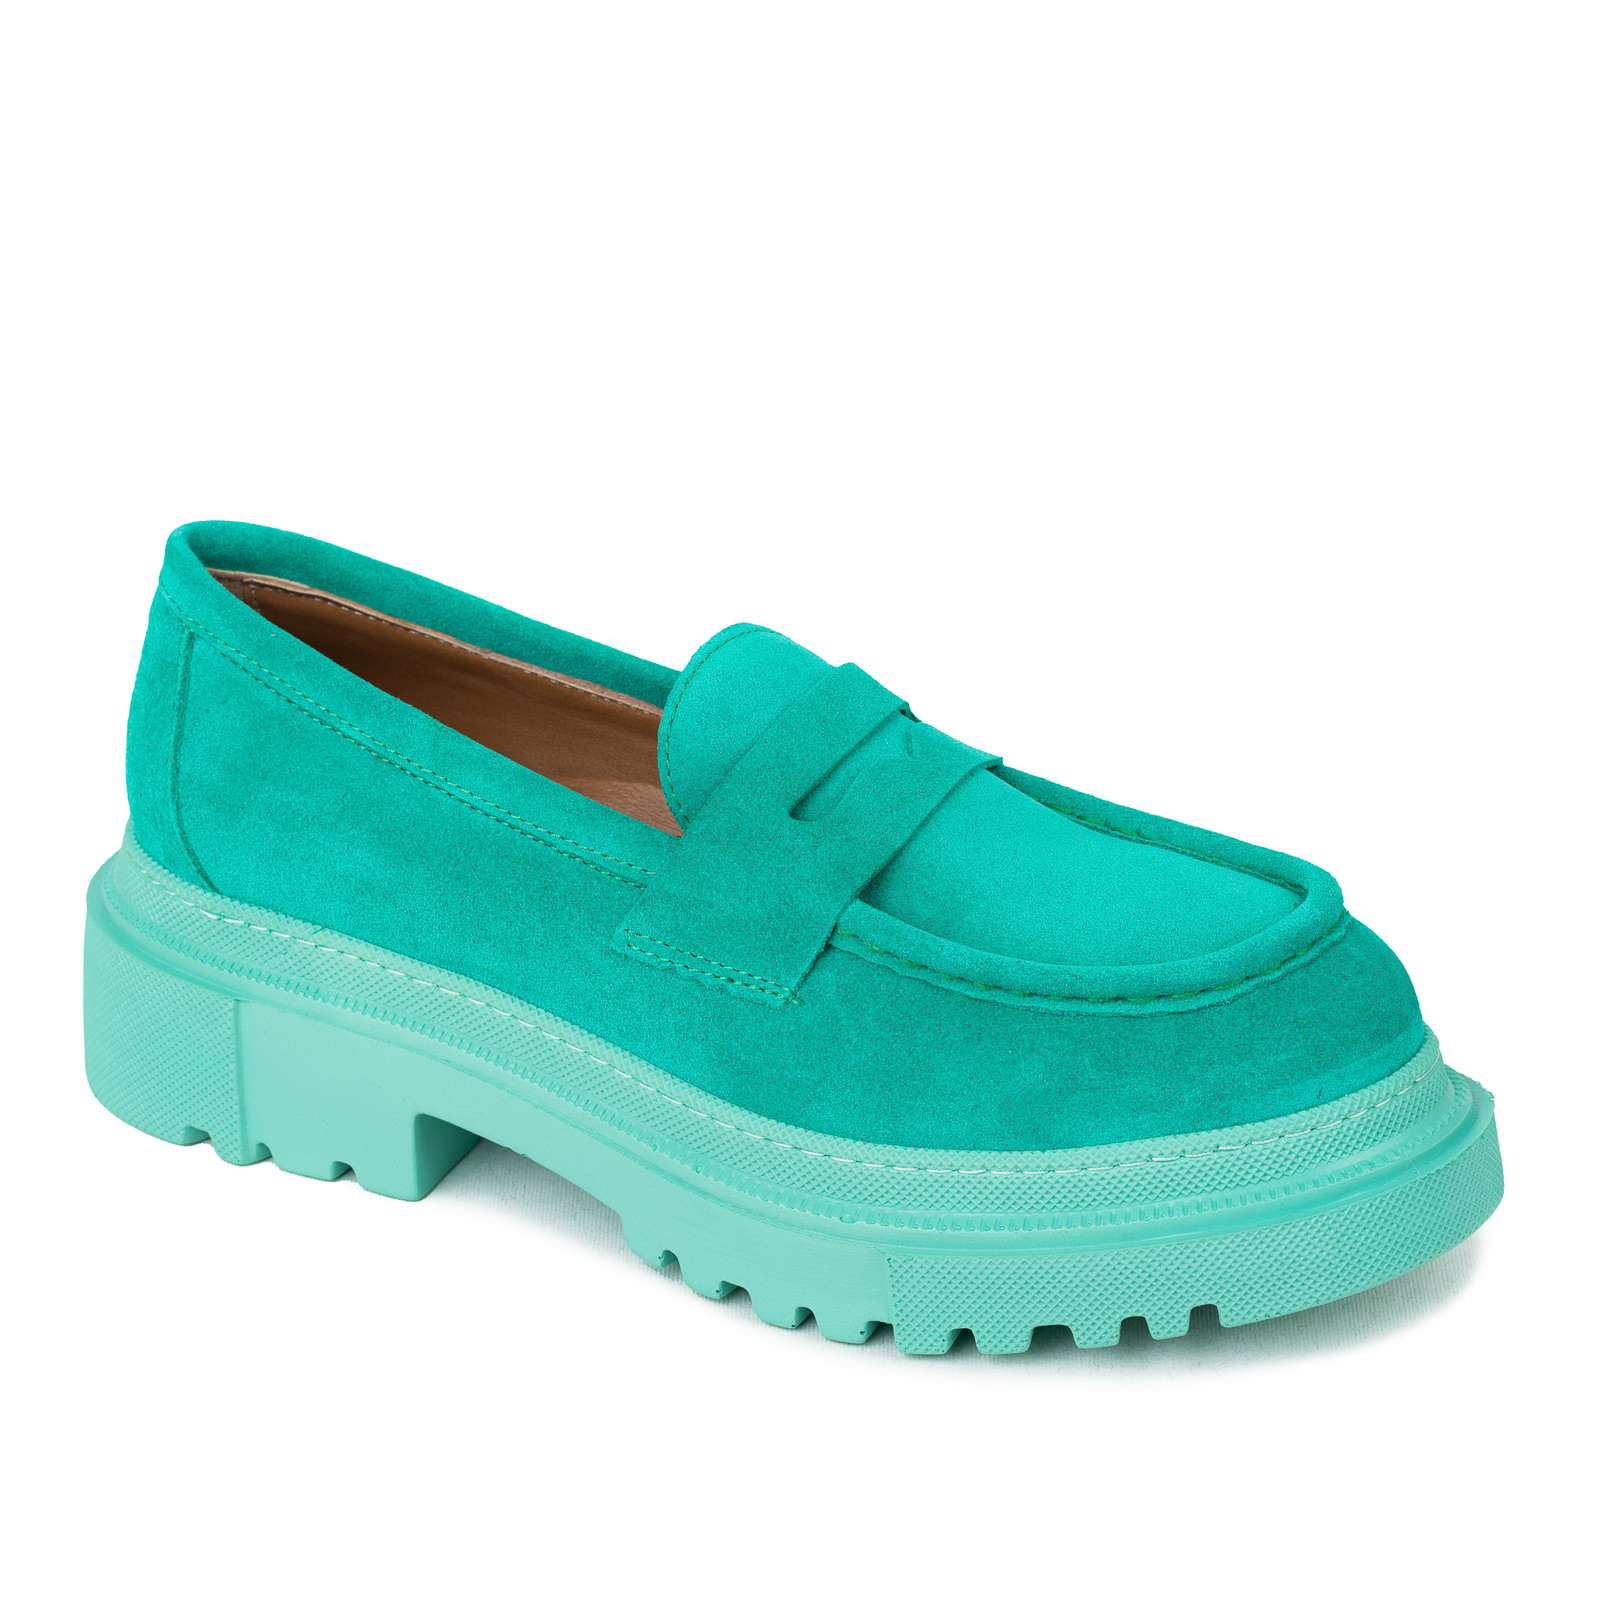 Leather shoes & flats B063 - TURQUOISE